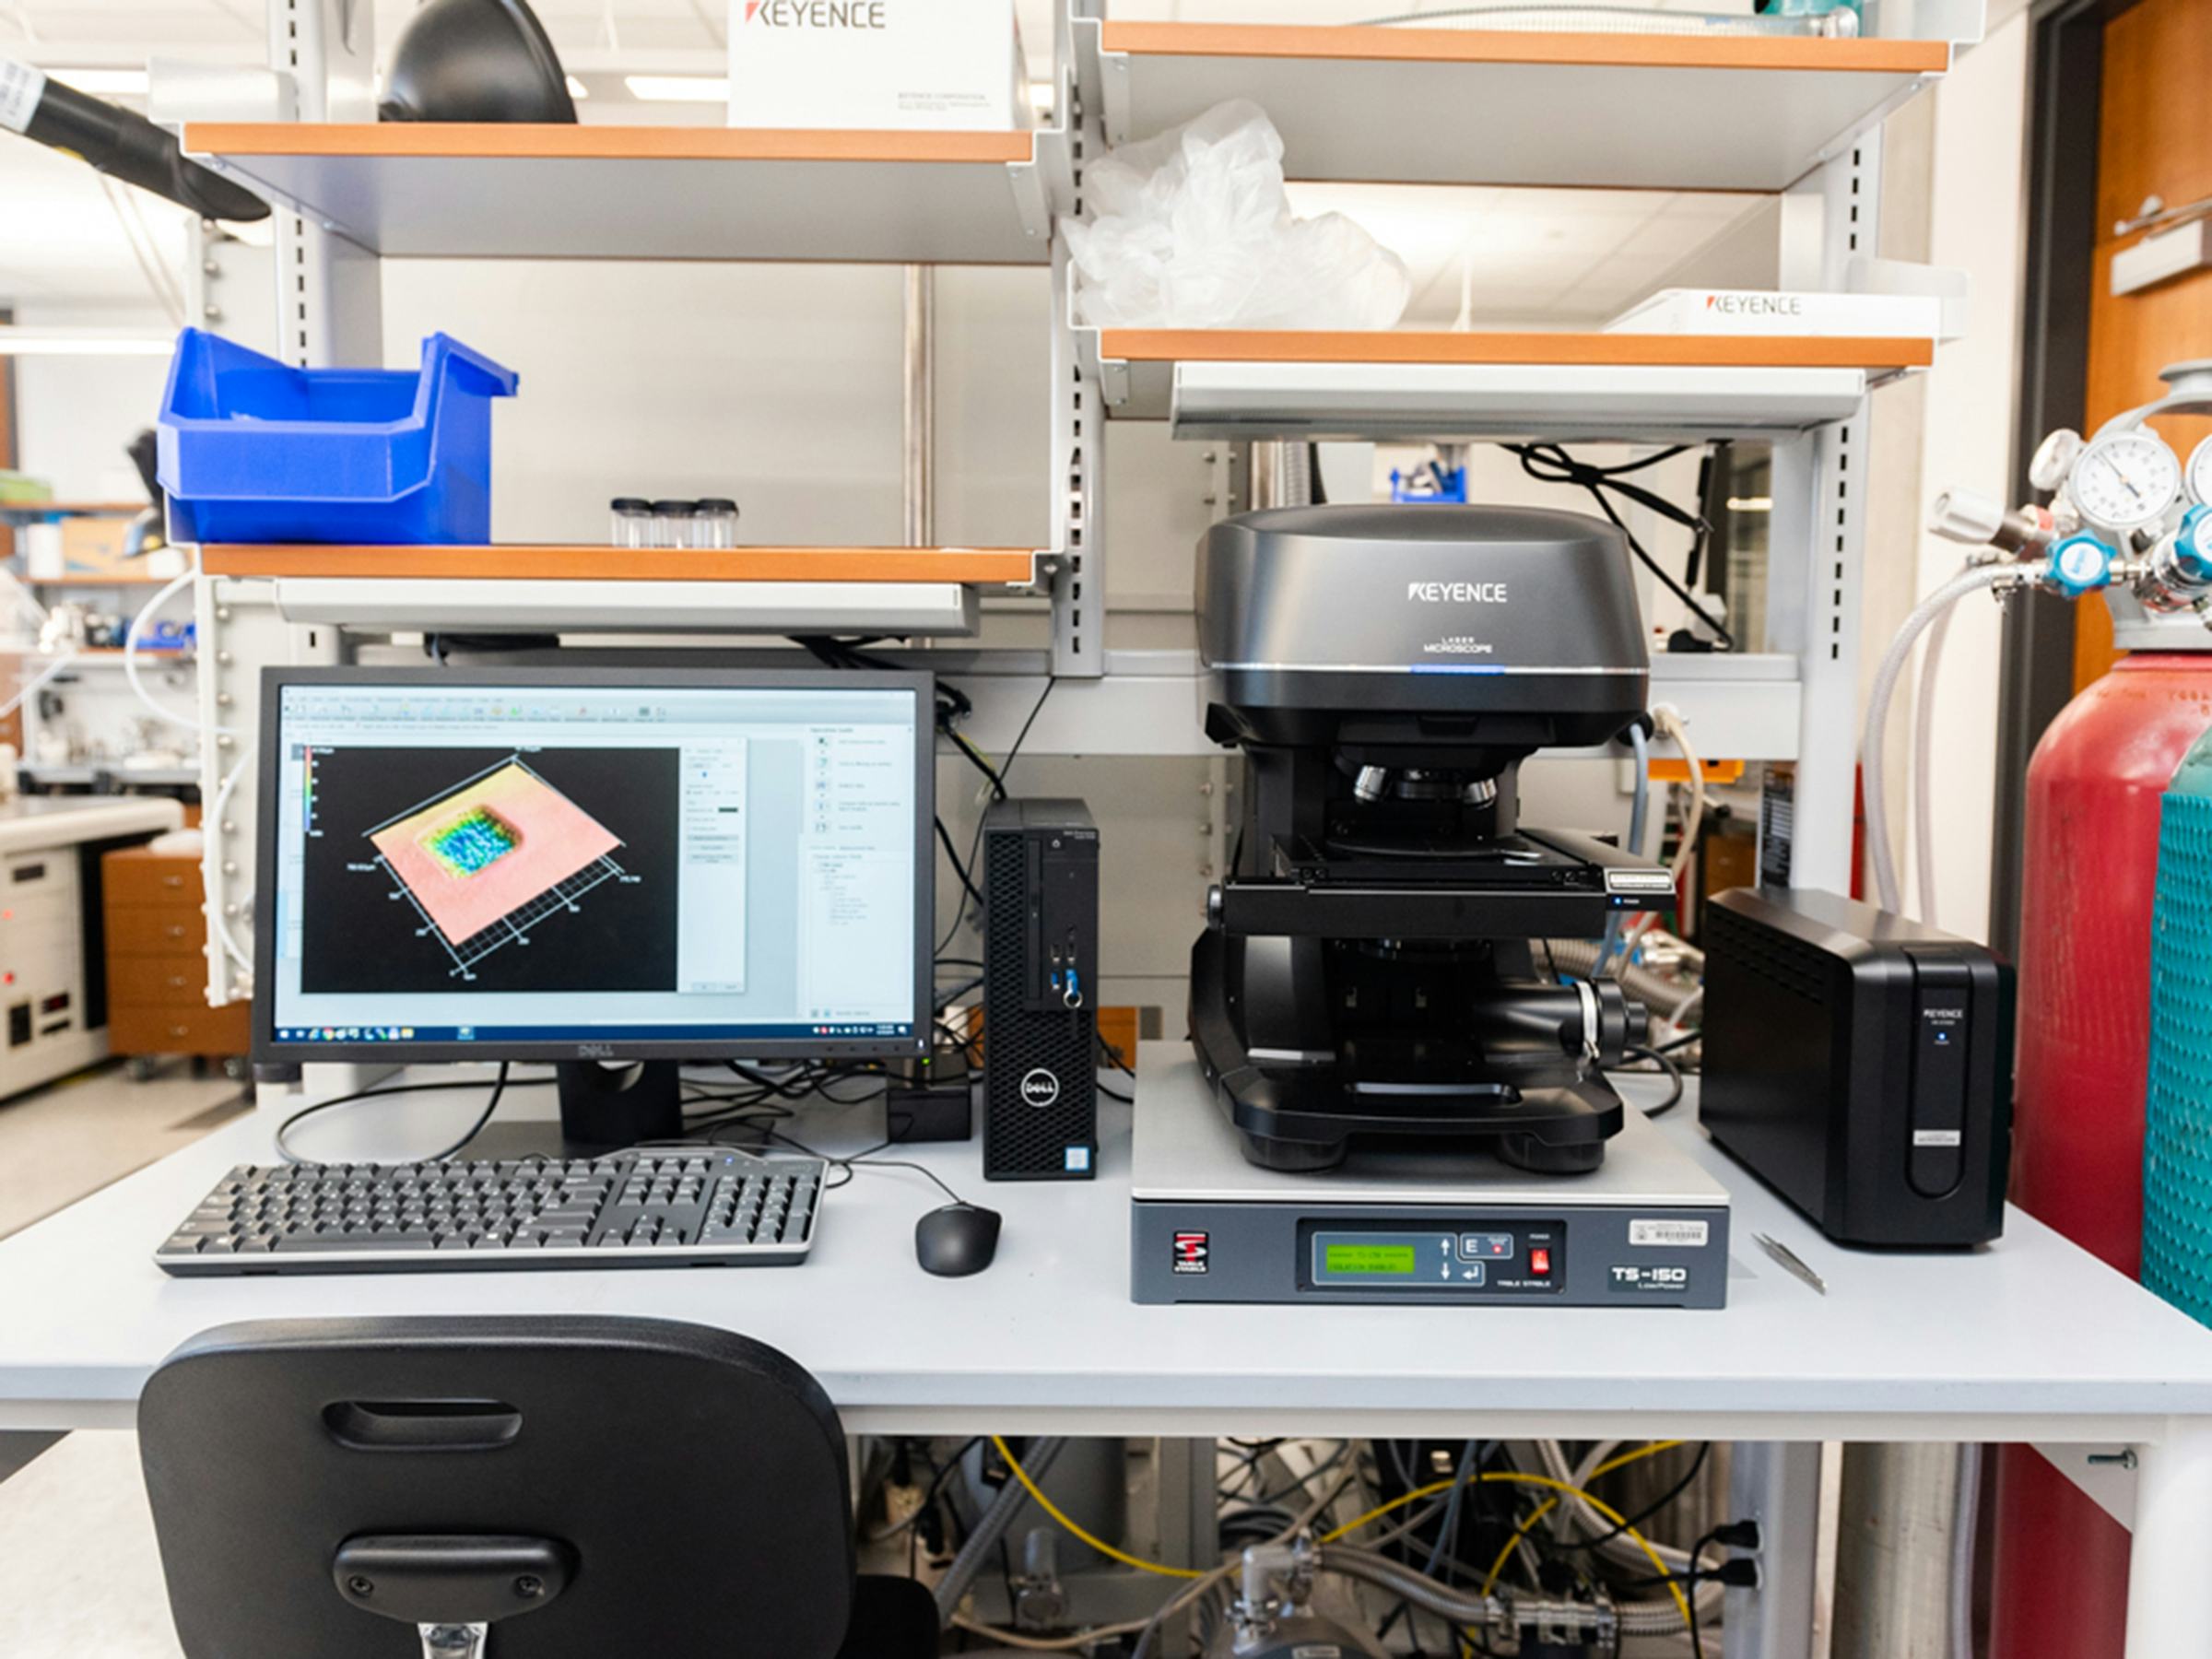 A Photo of research equipment